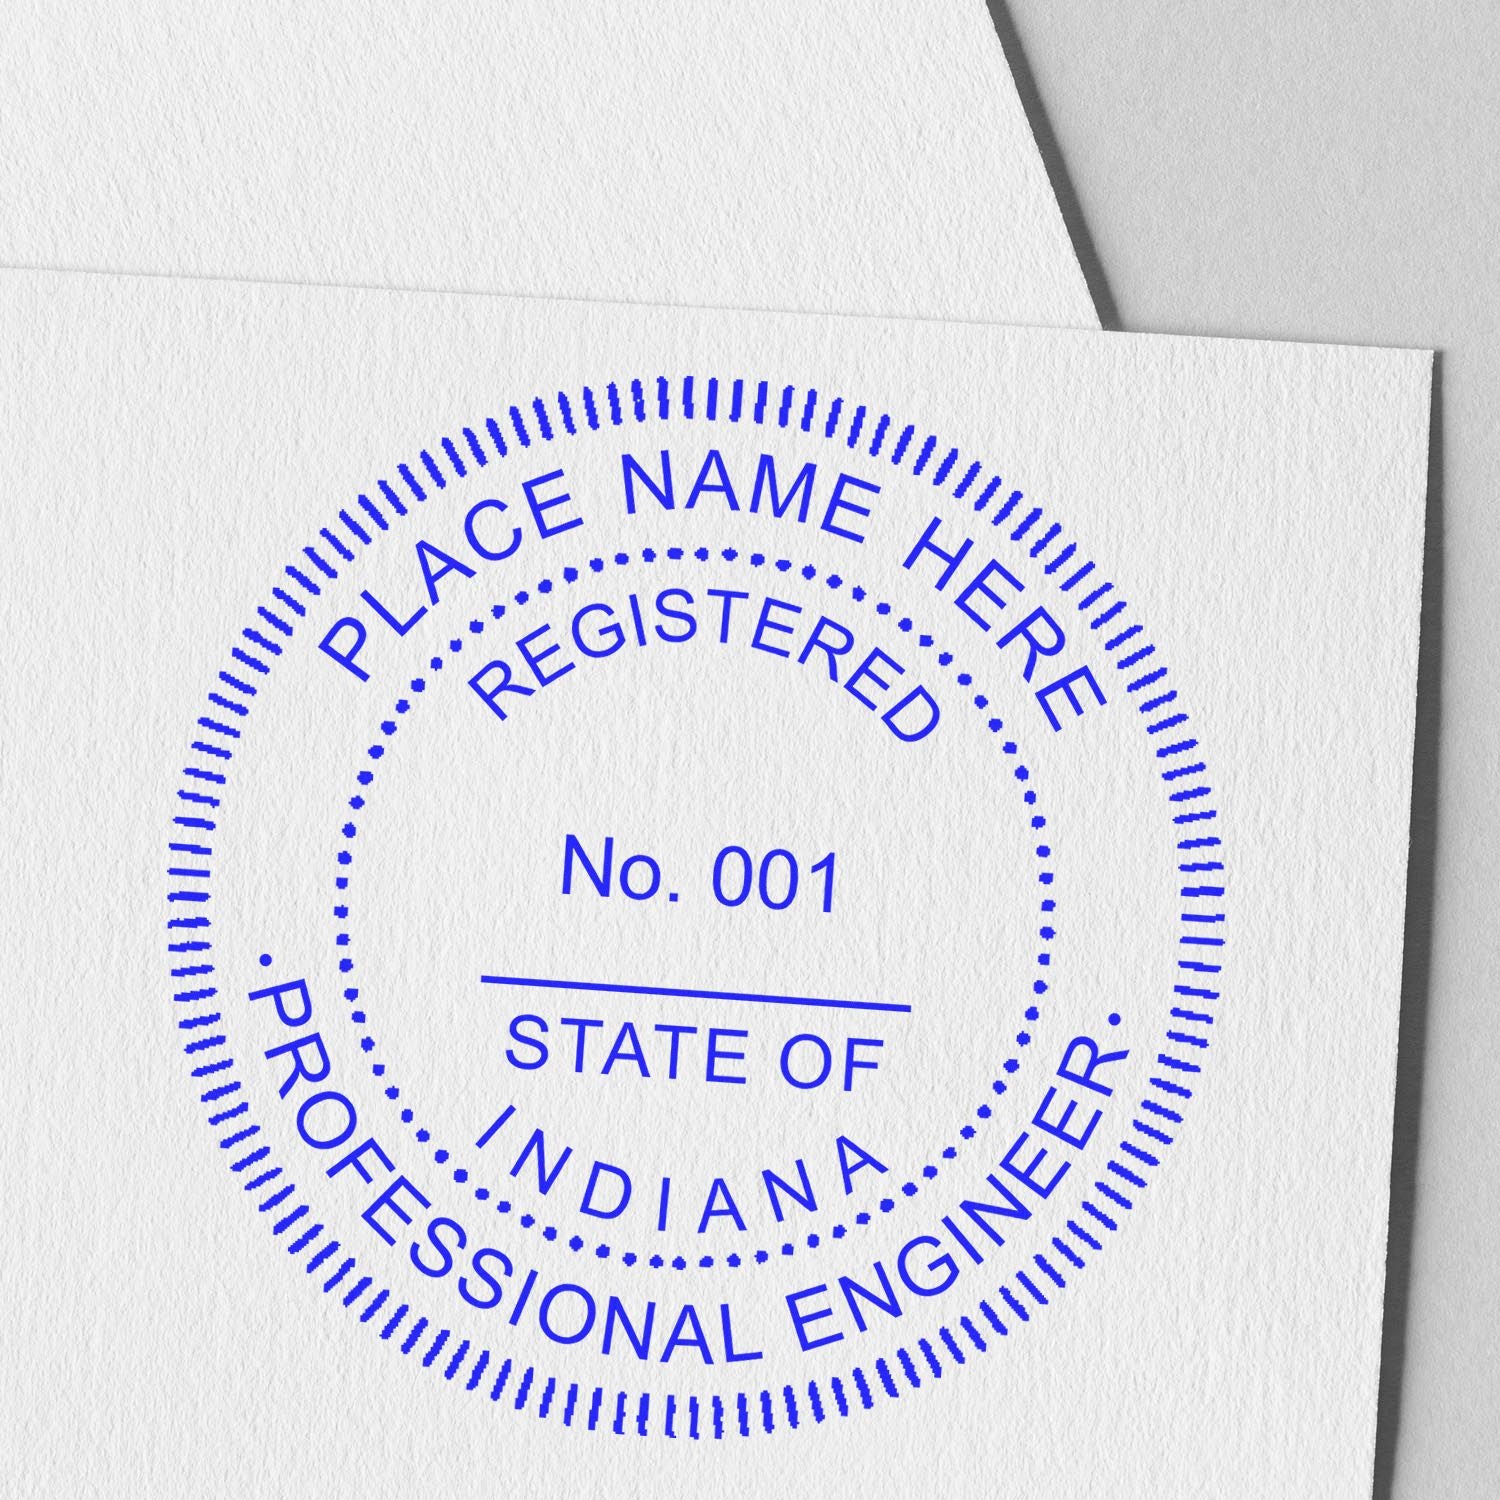 The Self-Inking Indiana PE Stamp stamp impression comes to life with a crisp, detailed photo on paper - showcasing true professional quality.